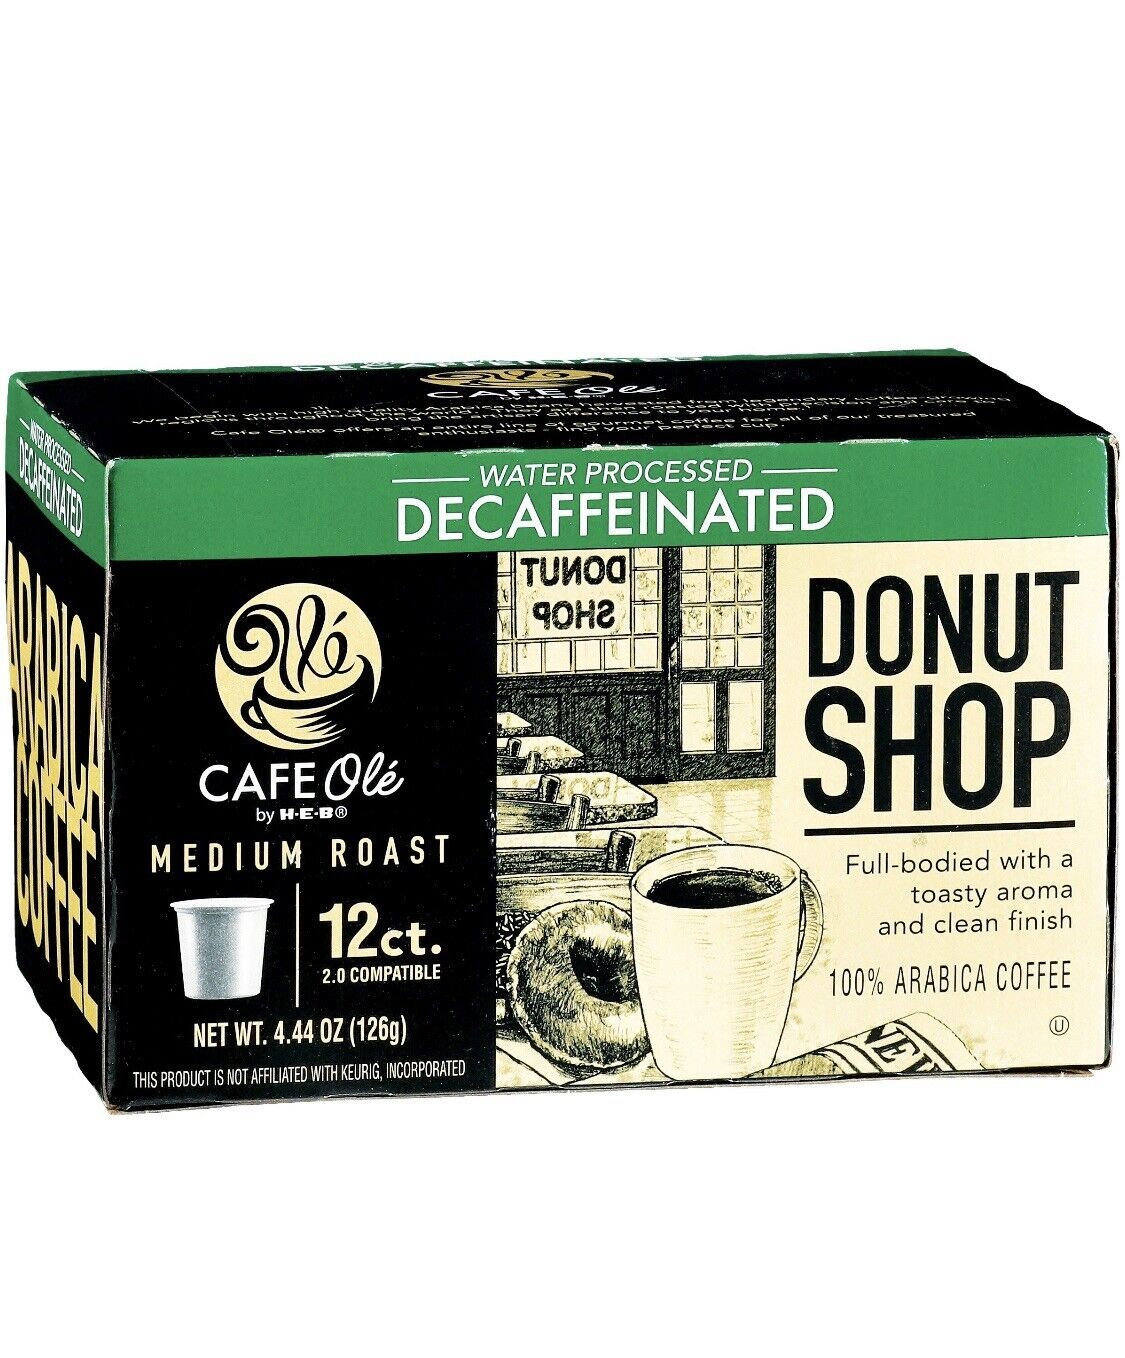 Primary image for Cafe Ole Decaf Donut Shop coffee. 12 count box. Lot of 3. keurig compatible